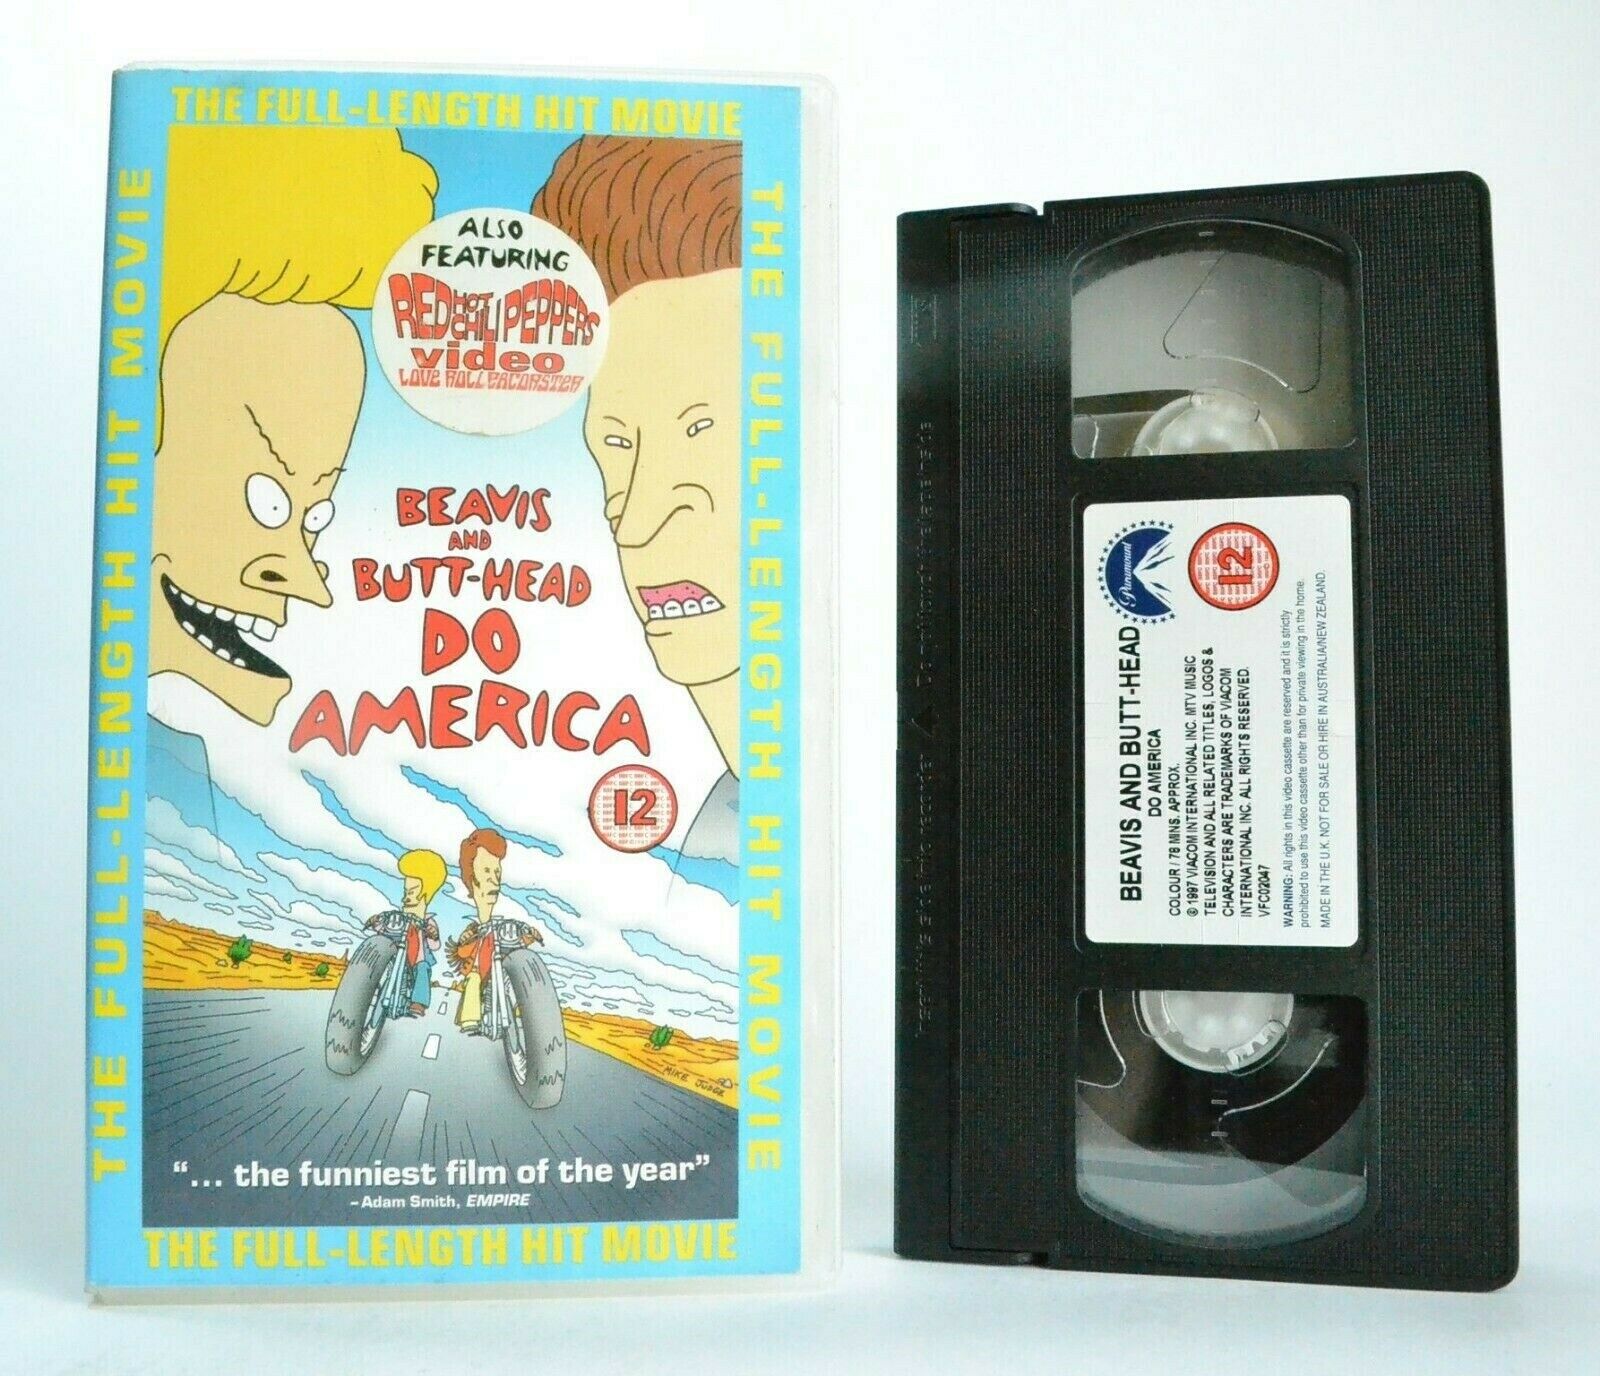 Beavis And Butt-Head Do America: By M.Judge - Adult Animated Road Comedy - VHS-